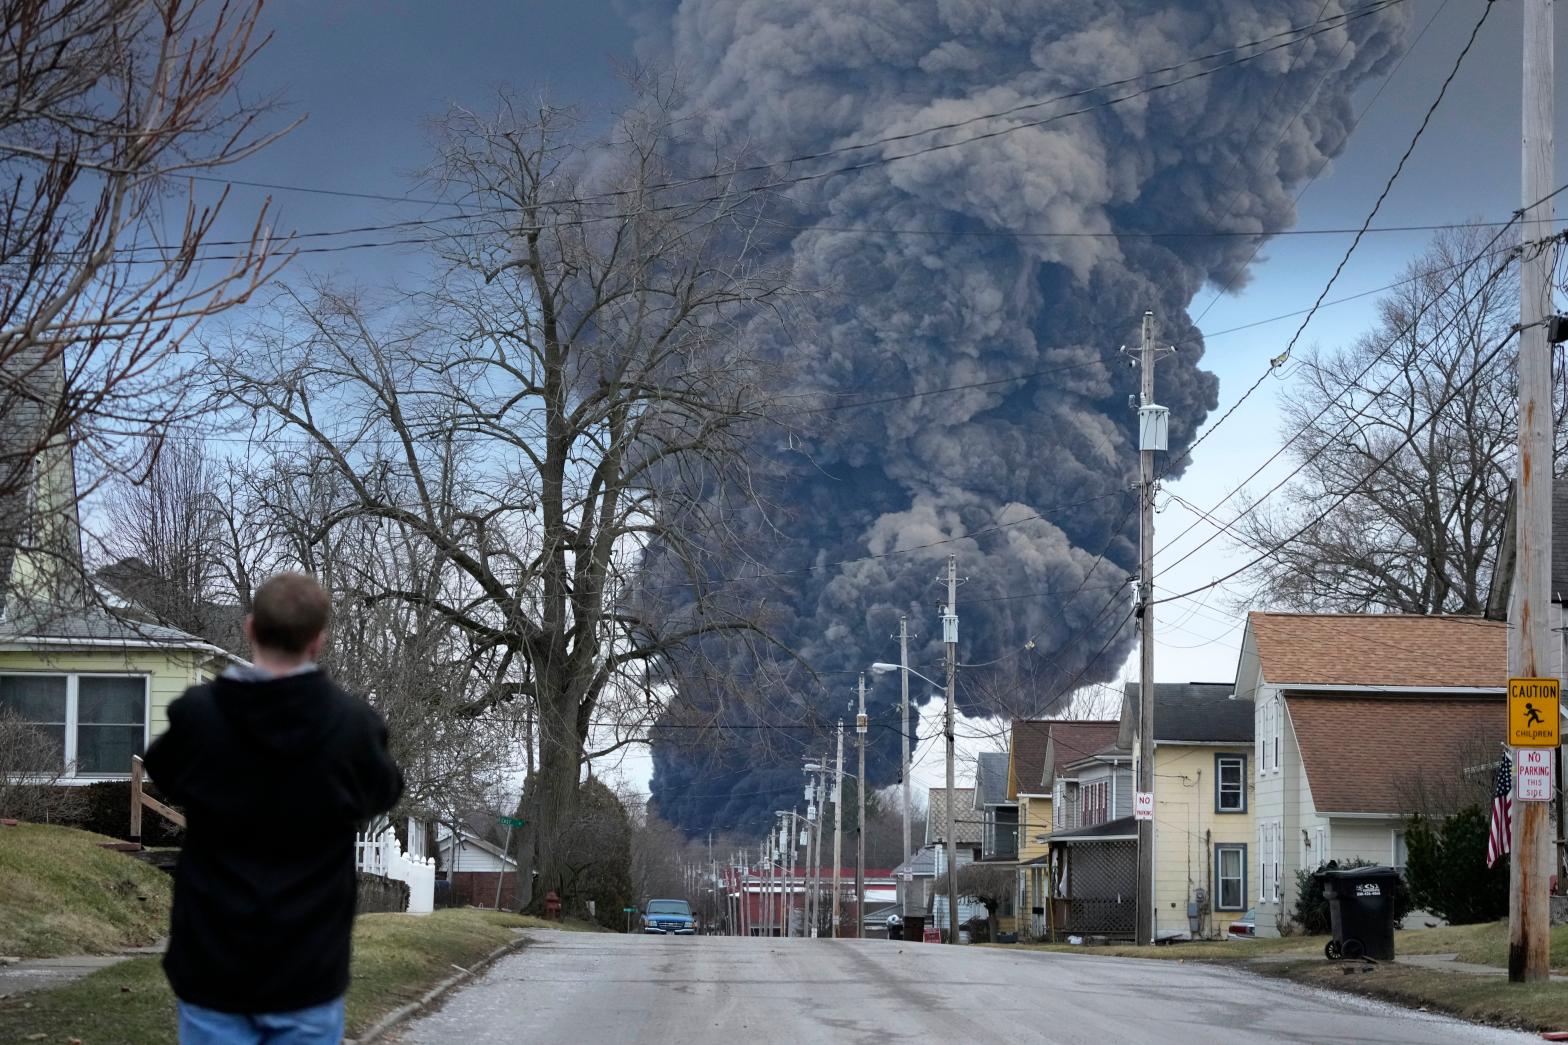 A man takes photos as a black plume rises over East Palestine, Ohio, as a result of a controlled detonation of a portion of the derailed Norfolk Southern train, Feb. 6, 2023. (Photo: AP Photo/Gene J. Puskar, AP)